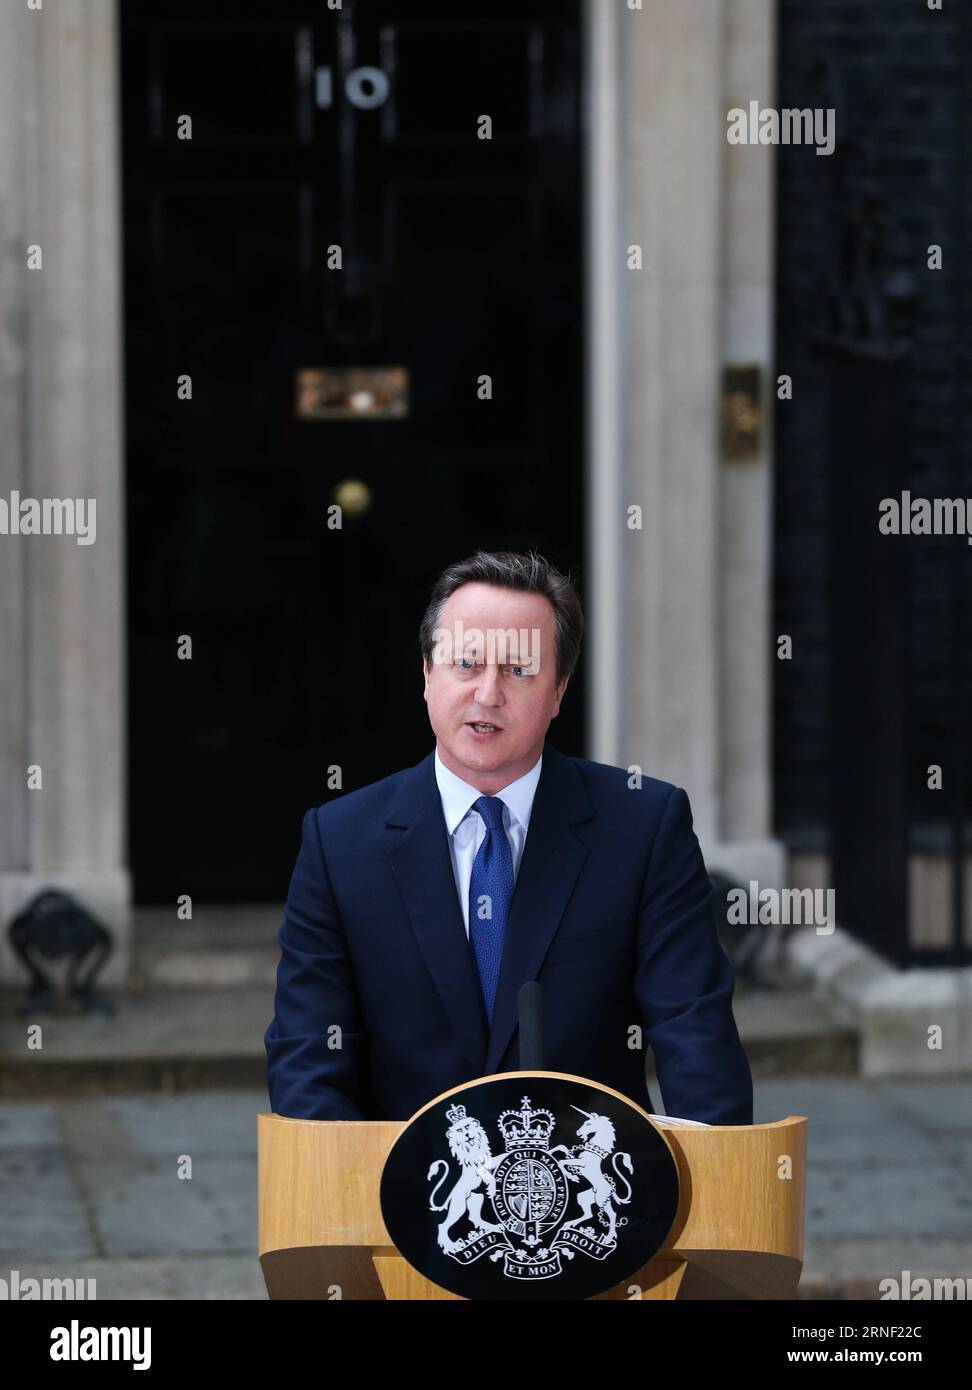 (160713) -- LONDON, JULY 13, 2016 -- British outgoing Prime Minister David Cameron gives a speech before leaving 10 Downing Street in London, Britain on July 13, 2016. Cameron bid farewell to 10 Downing Street and headed to Buckingham Palace to offer his resignation to Queen Elizabeth II on Wednesday afternoon. ) BRITAIN-LONDON-DAVID CAMERON-RESIGNATION HanxYan PUBLICATIONxNOTxINxCHN   160713 London July 13 2016 British Outgoing Prime Ministers David Cameron Gives a Speech Before leaving 10 Downing Street in London Britain ON July 13 2016 Cameron BID Farewell to 10 Downing Street and Headed to Stock Photo